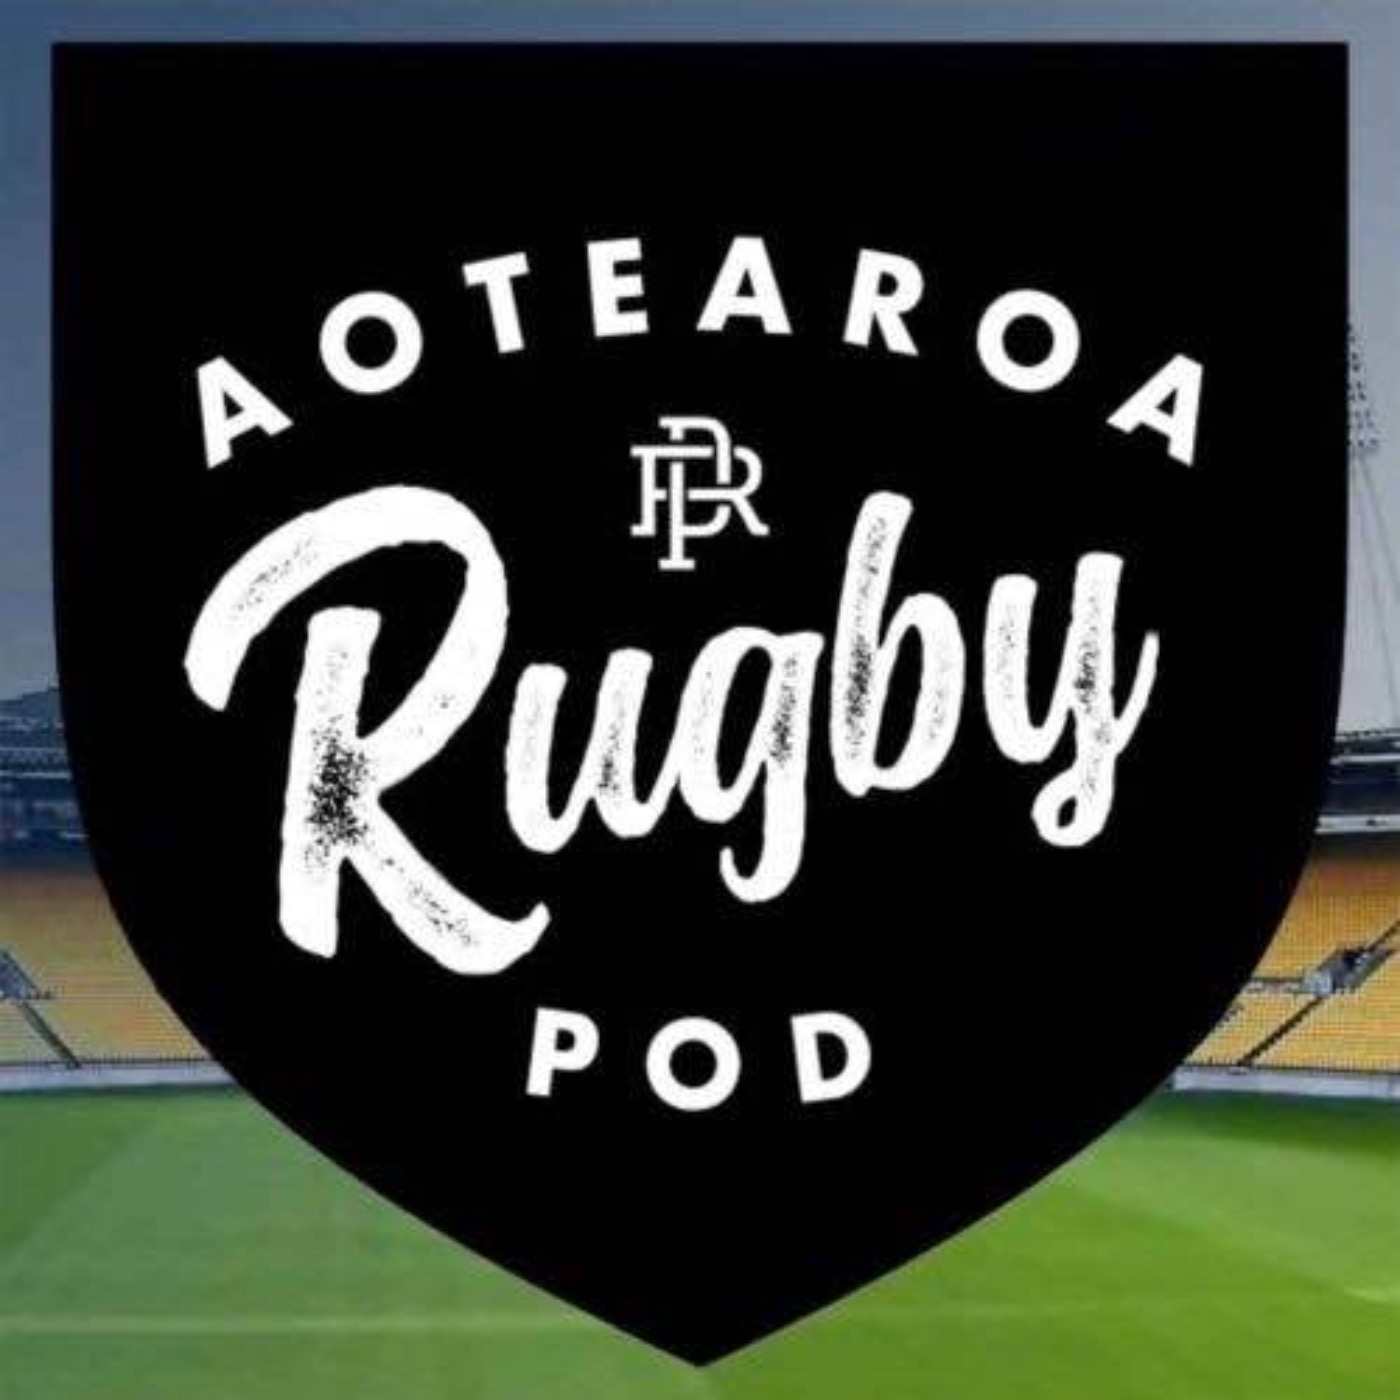 Debating Super Rugby's best fullback and reacting to round one